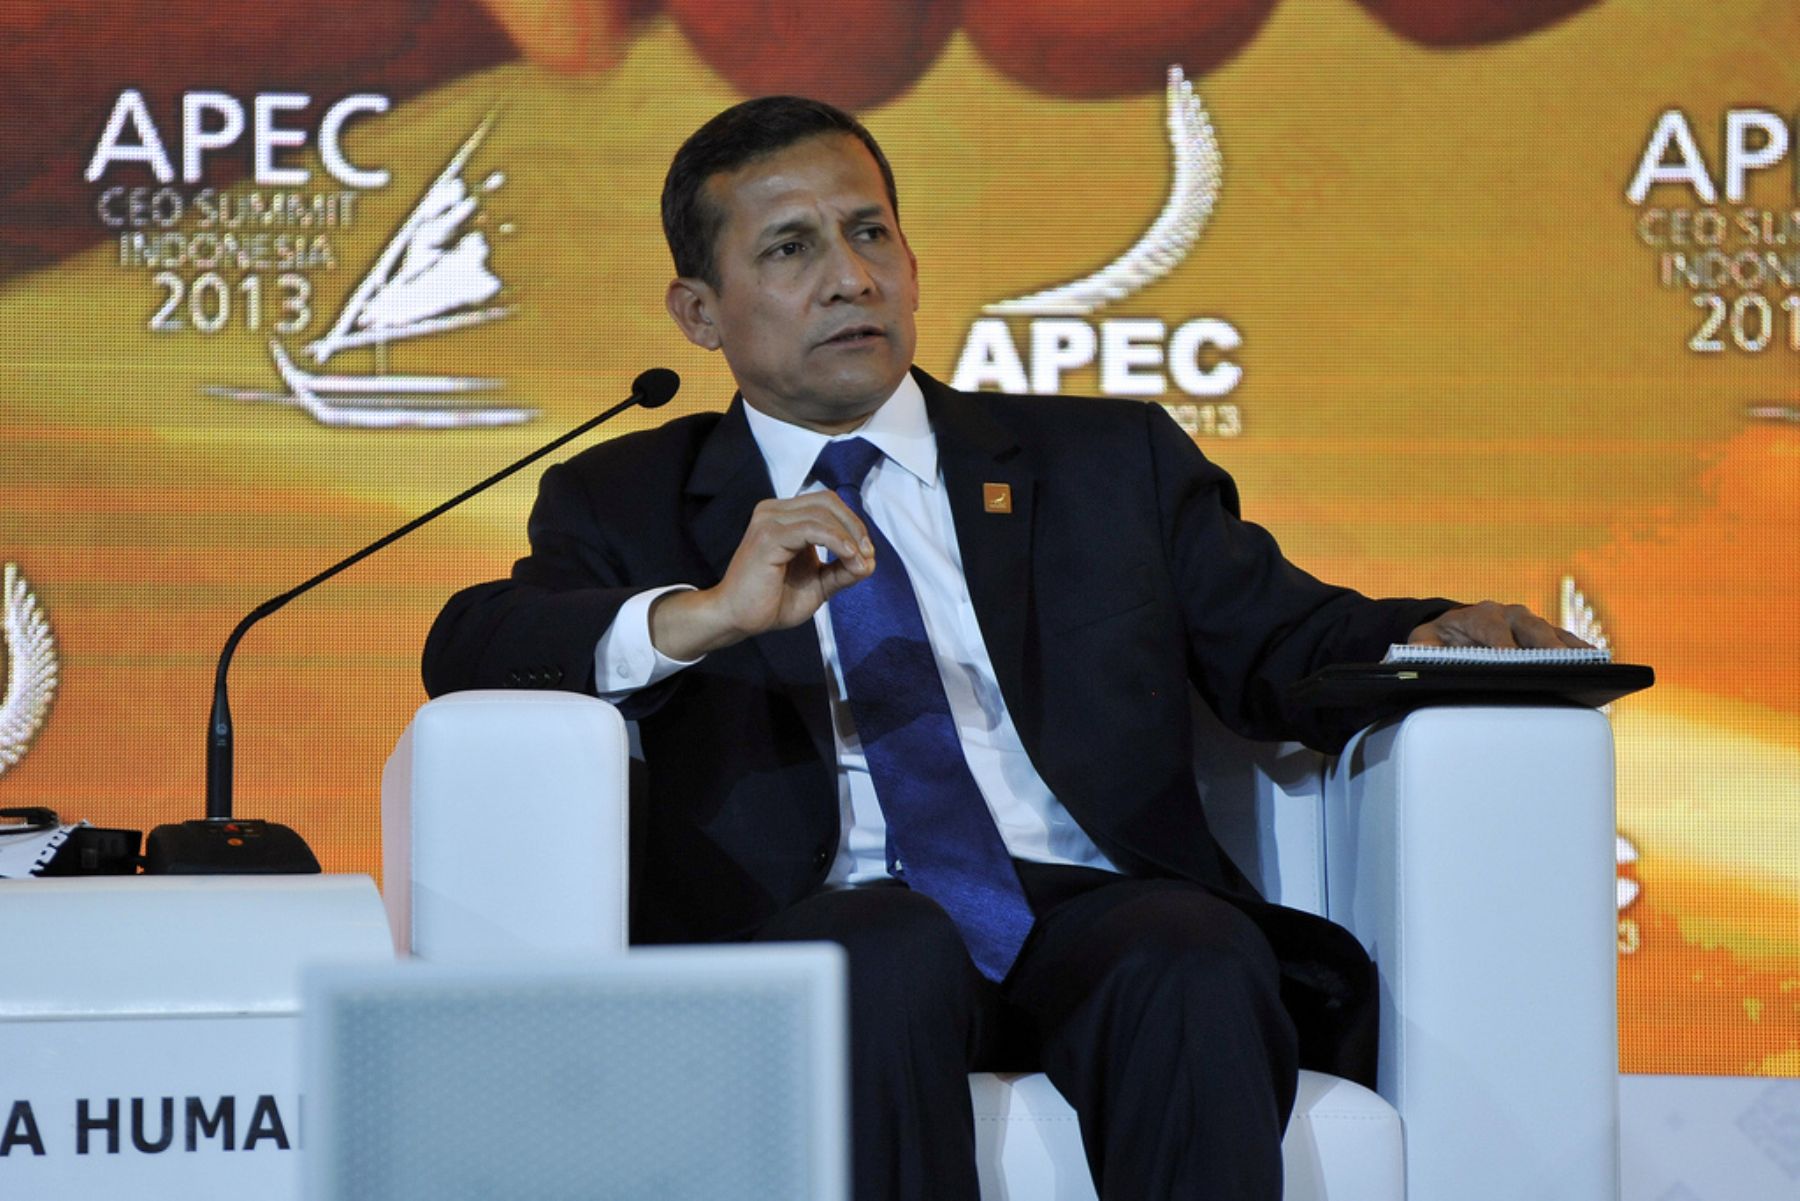 Peruvian President Ollanta Humala in his address to the opening session of the 2013 APEC CEO Summit. ANDINA/Presidencia